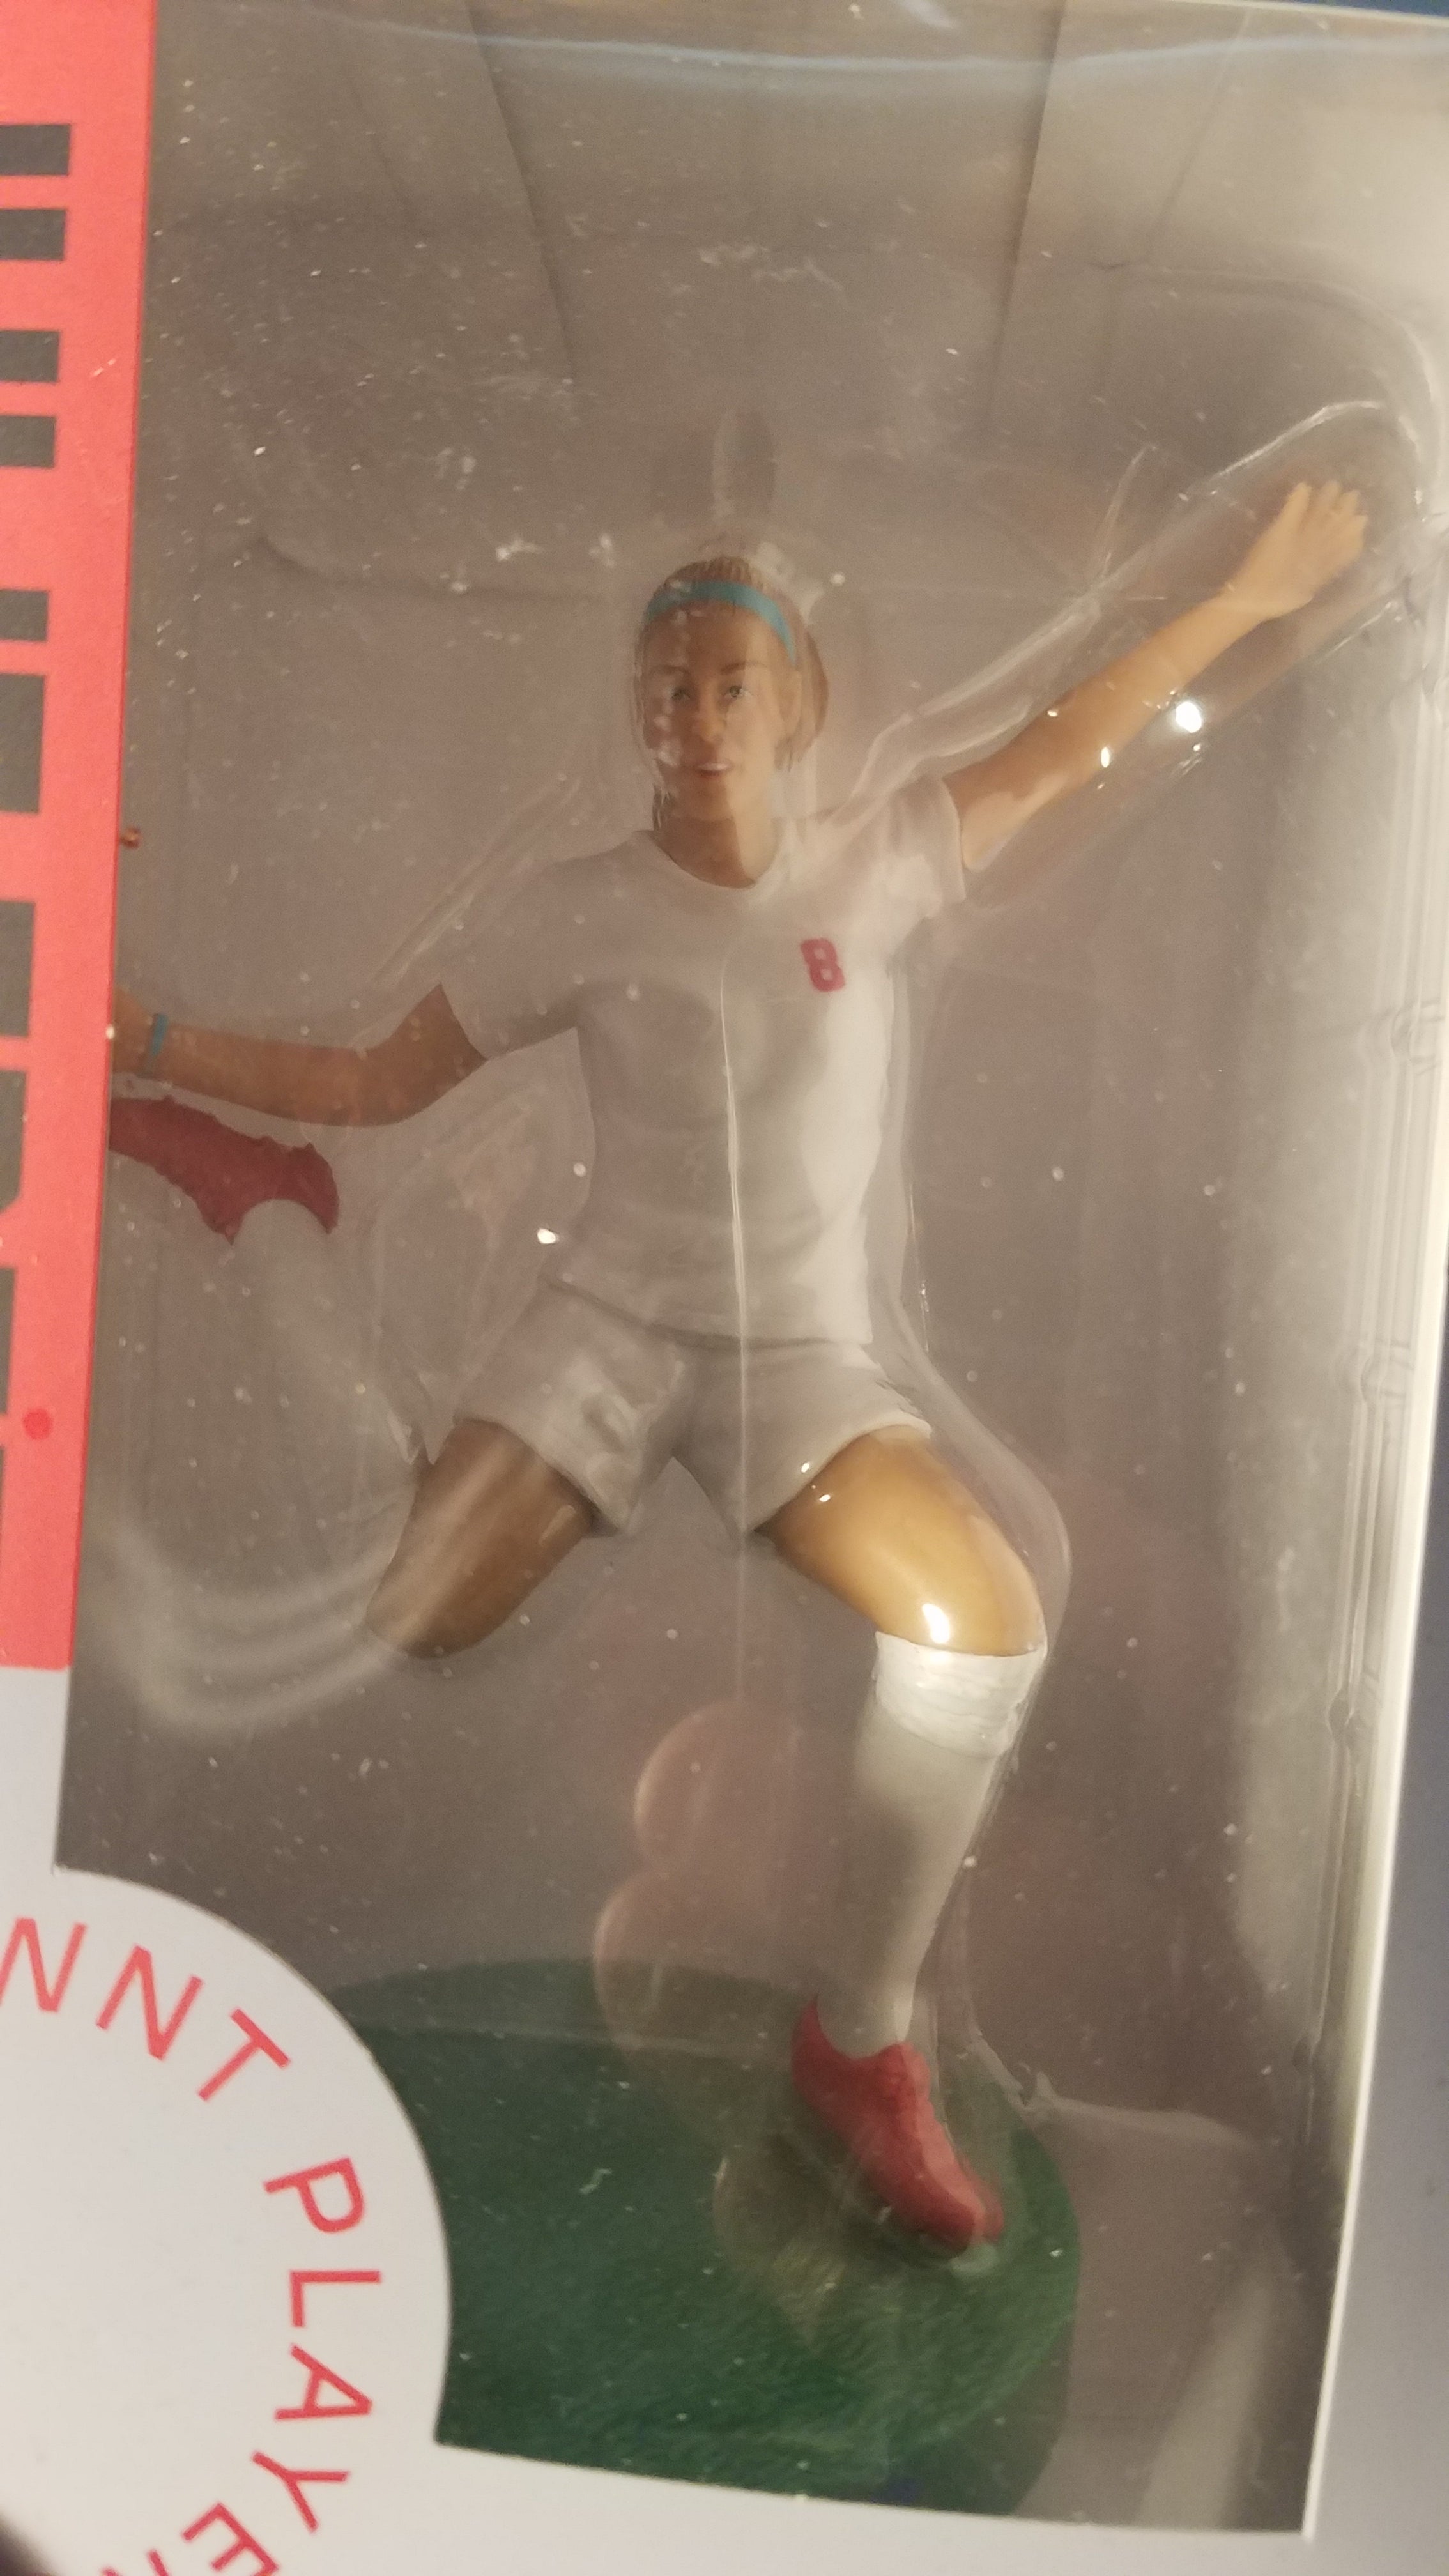 USWNT Women's World Cup Soccer Collectible Figures Julie Ertz New FREE SHIPPING